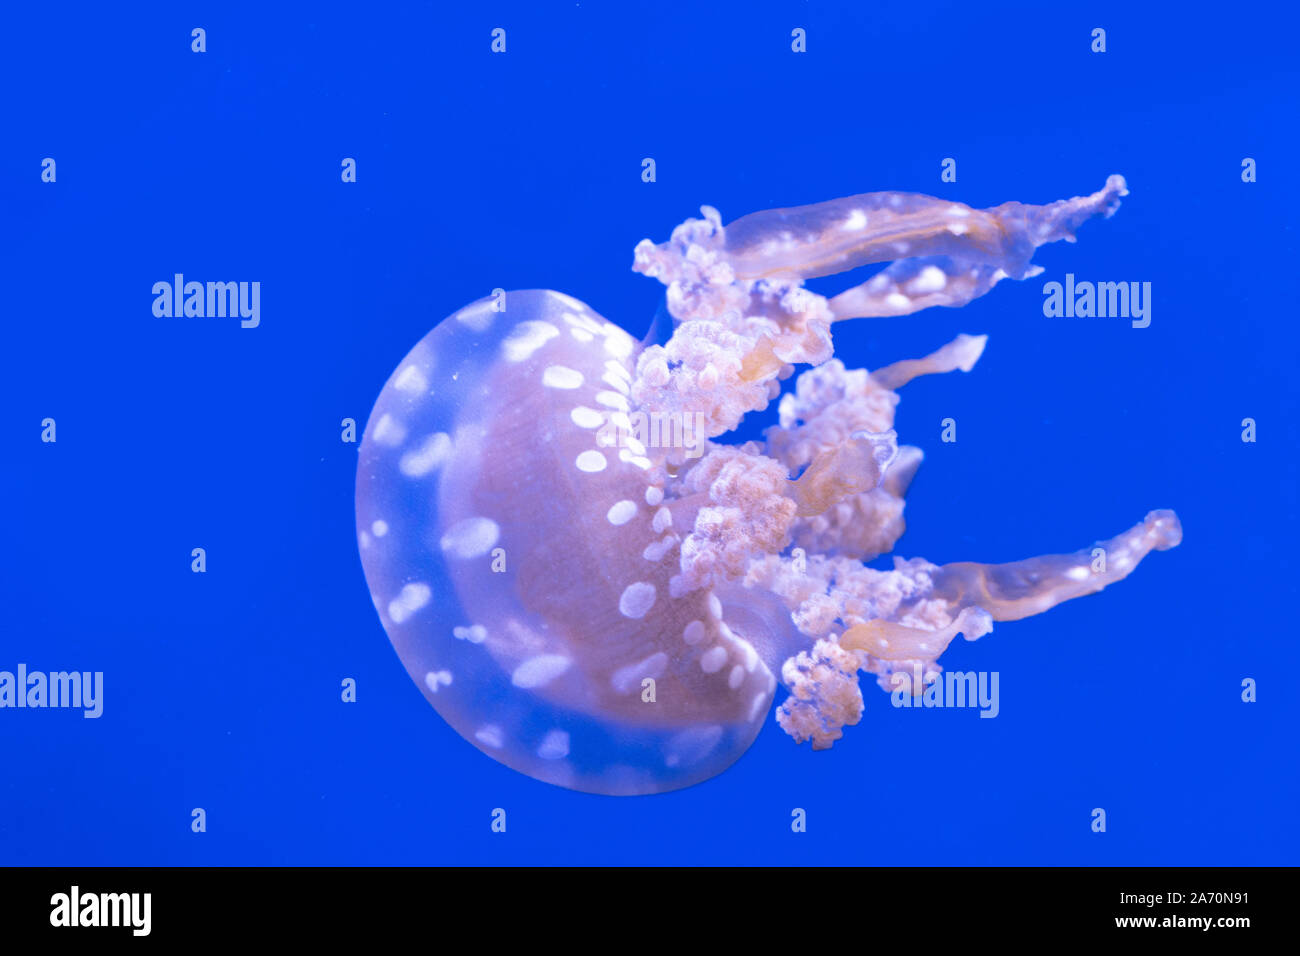 Spotted lagoon jellyfish. Spectacular jellyfish. Stock Photo